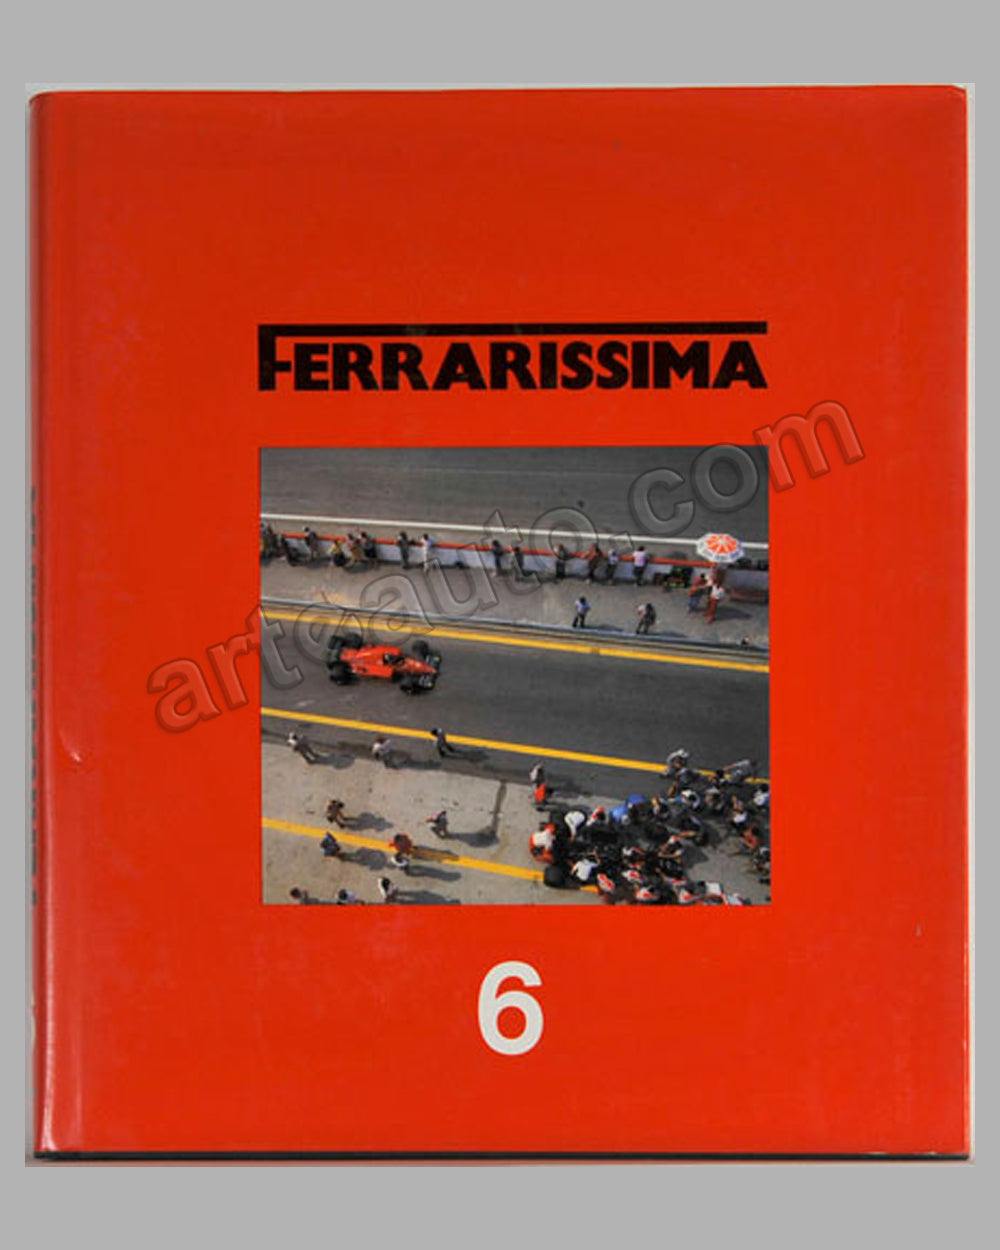 Ferrarissima 6 Book edited by G. Madaro, 1986, numbered ed. of 5000